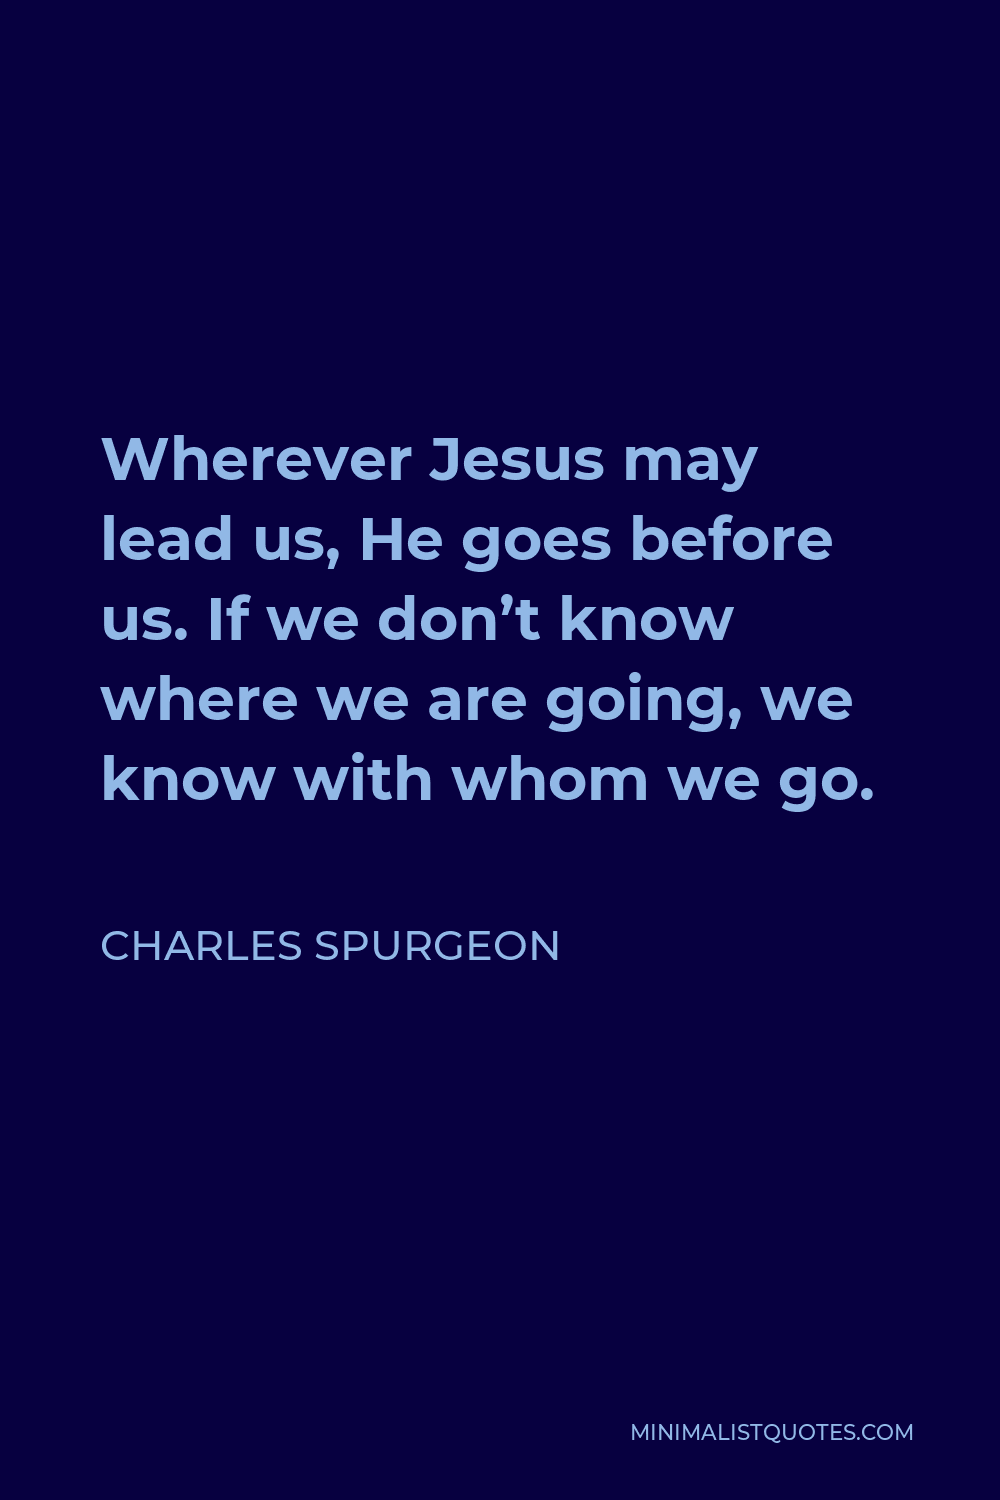 Charles Spurgeon Quote - Wherever Jesus may lead us, He goes before us. If we don’t know where we are going, we know with whom we go.